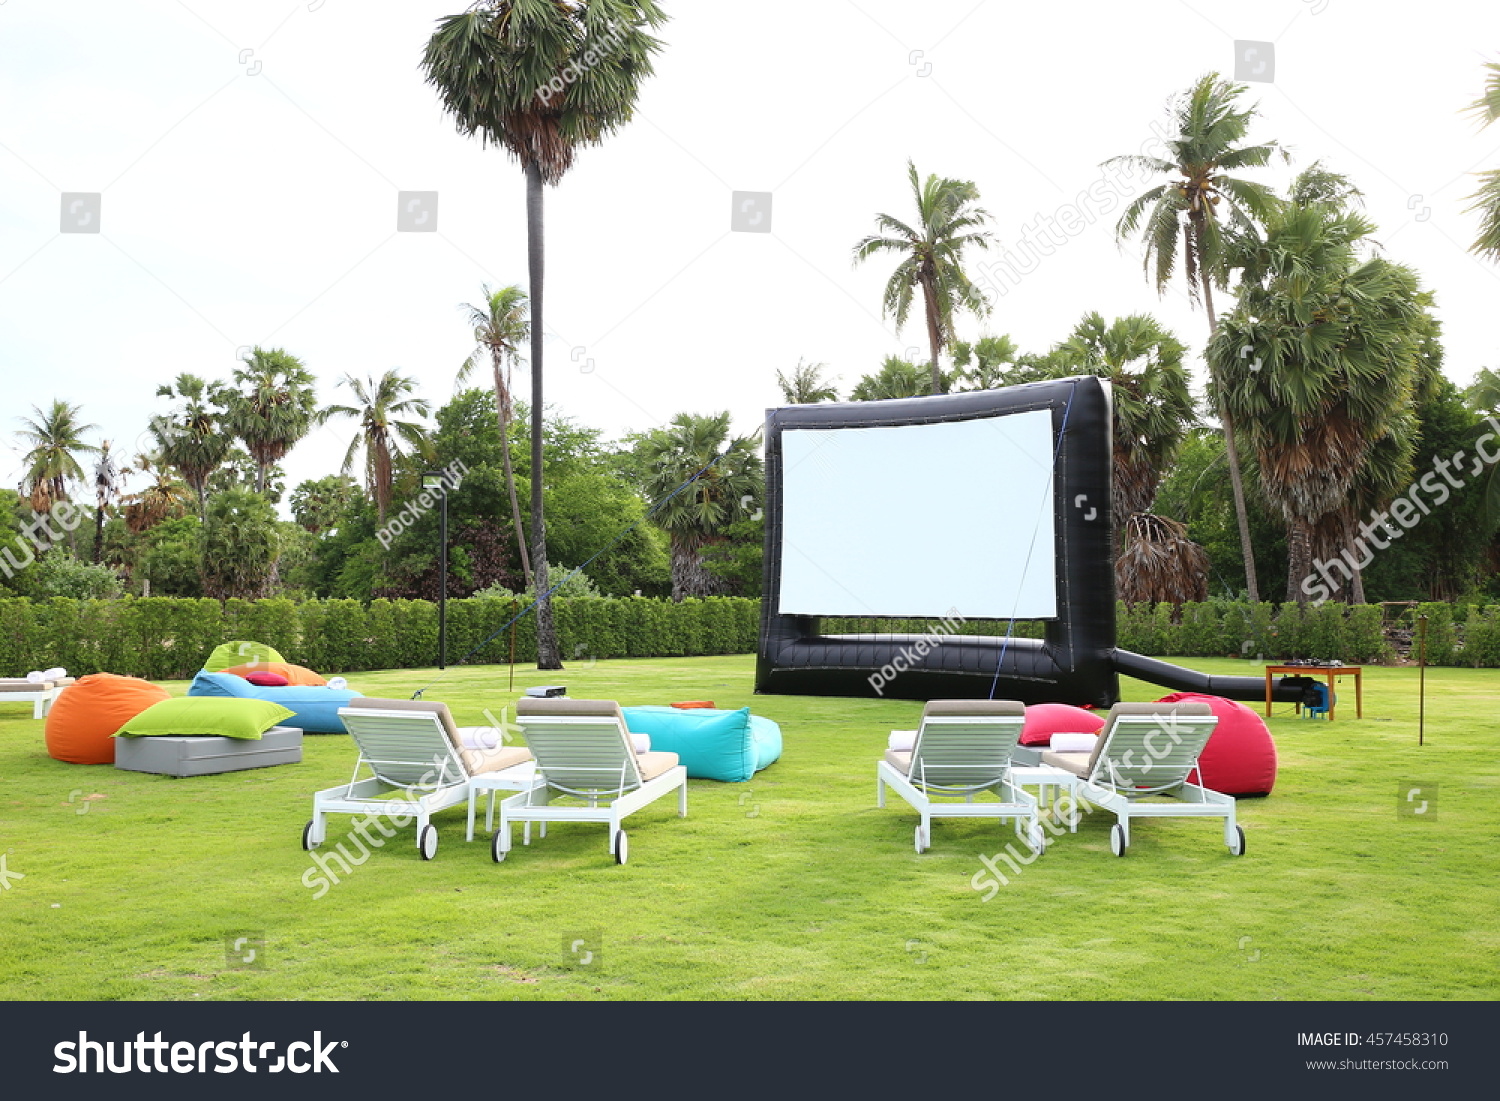 outdoor theater #457458310